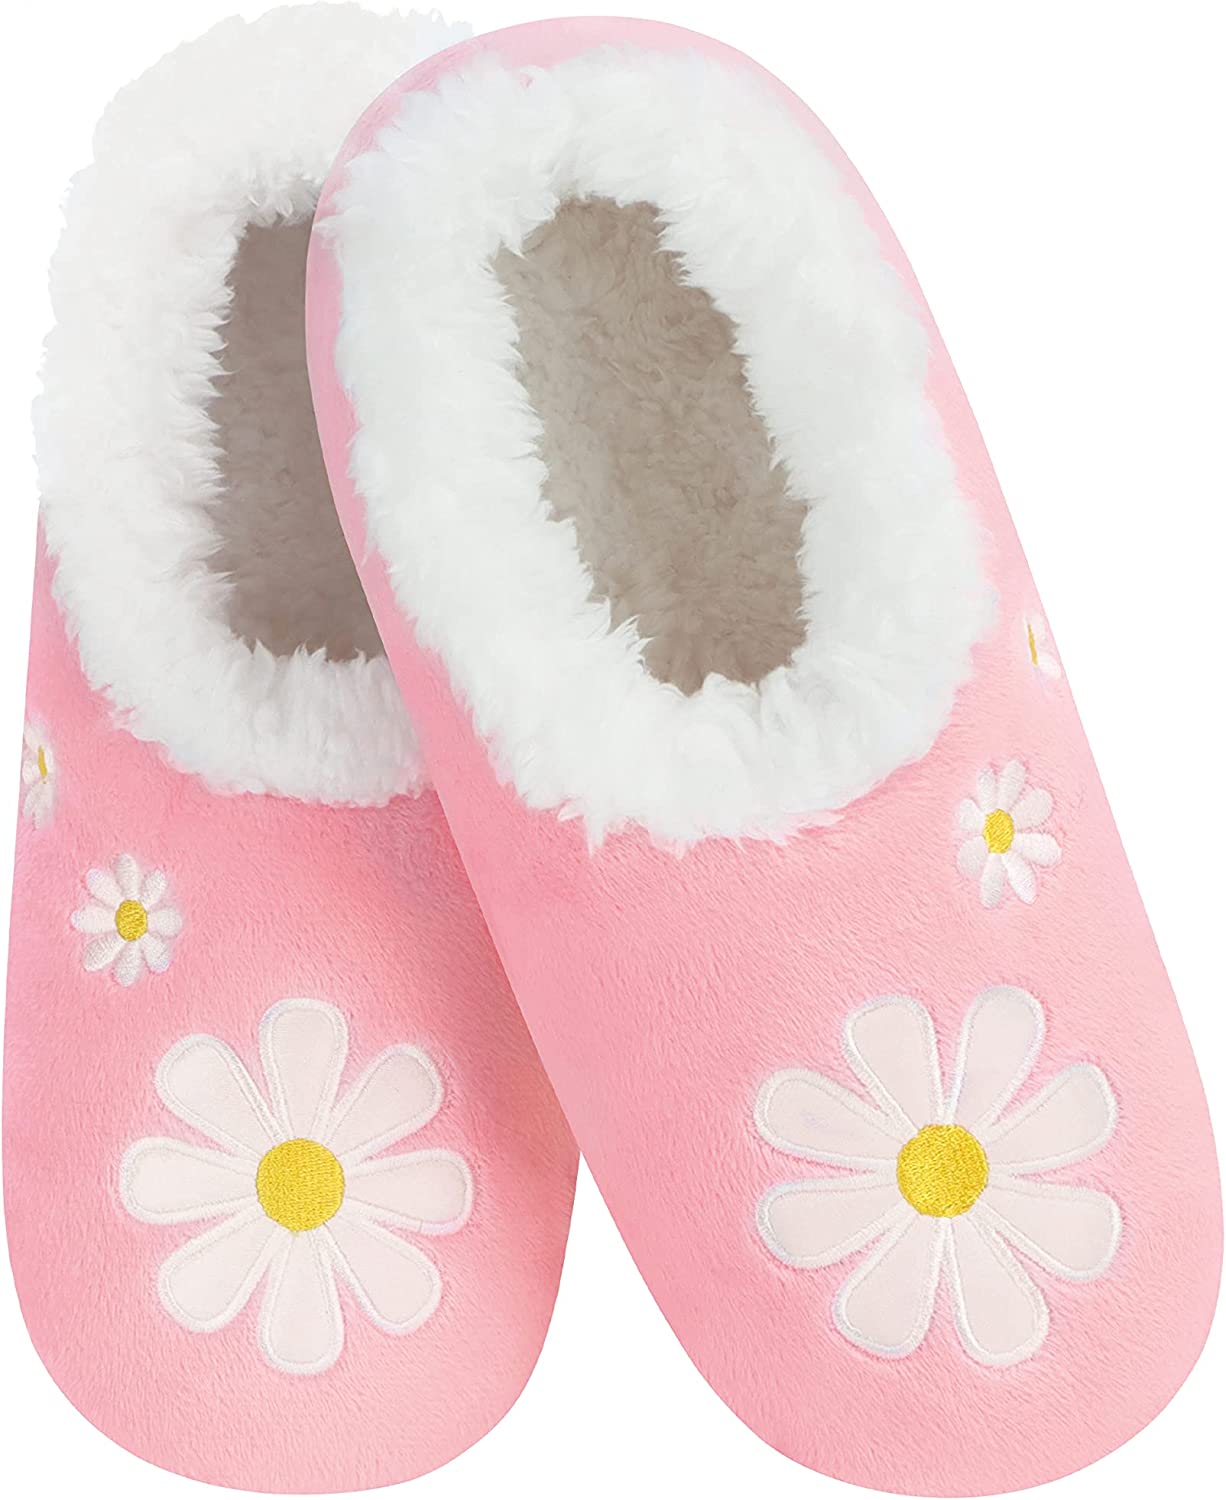 Snoozies Slippers – Daisy Co.